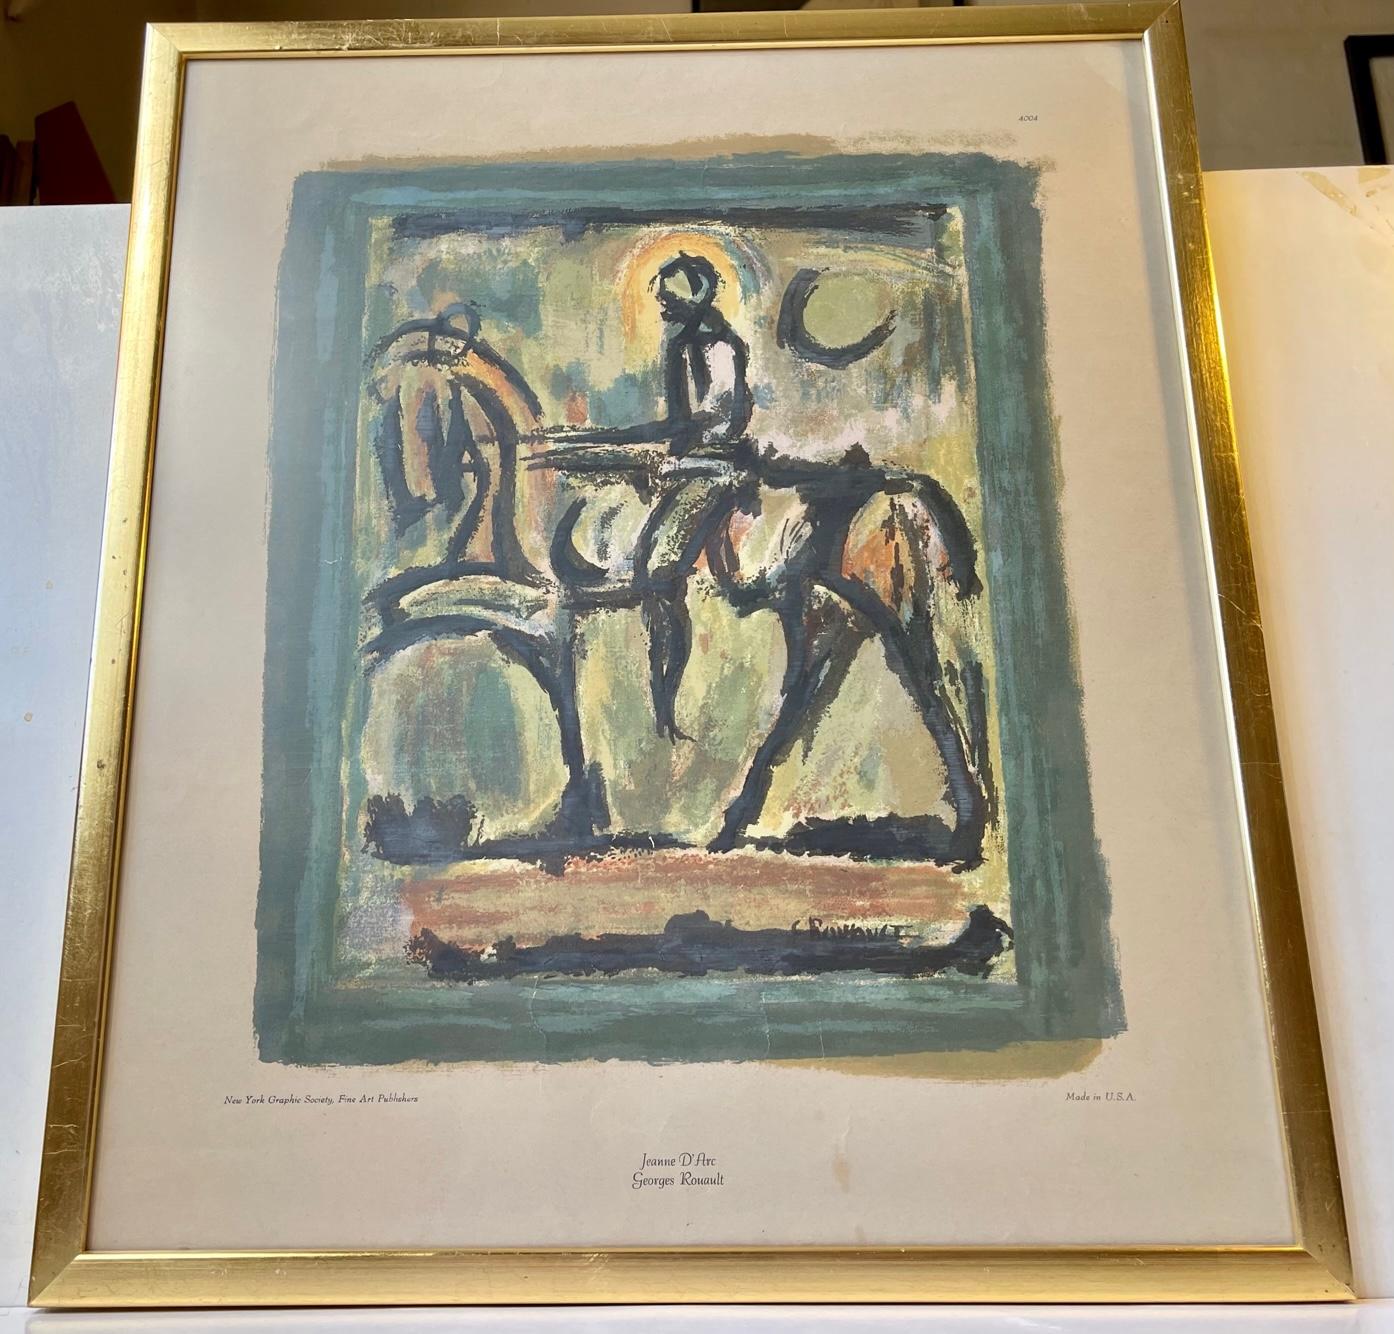 Jeanne D' Arc on horseback by Georges Rouault. Color Print number 4004 published by New York Graphic Society, Fine Art Publishers circa 1940. It is mounted in a gold-painted frame with a glass front. Measurements: 59x51x2 cm (framed).